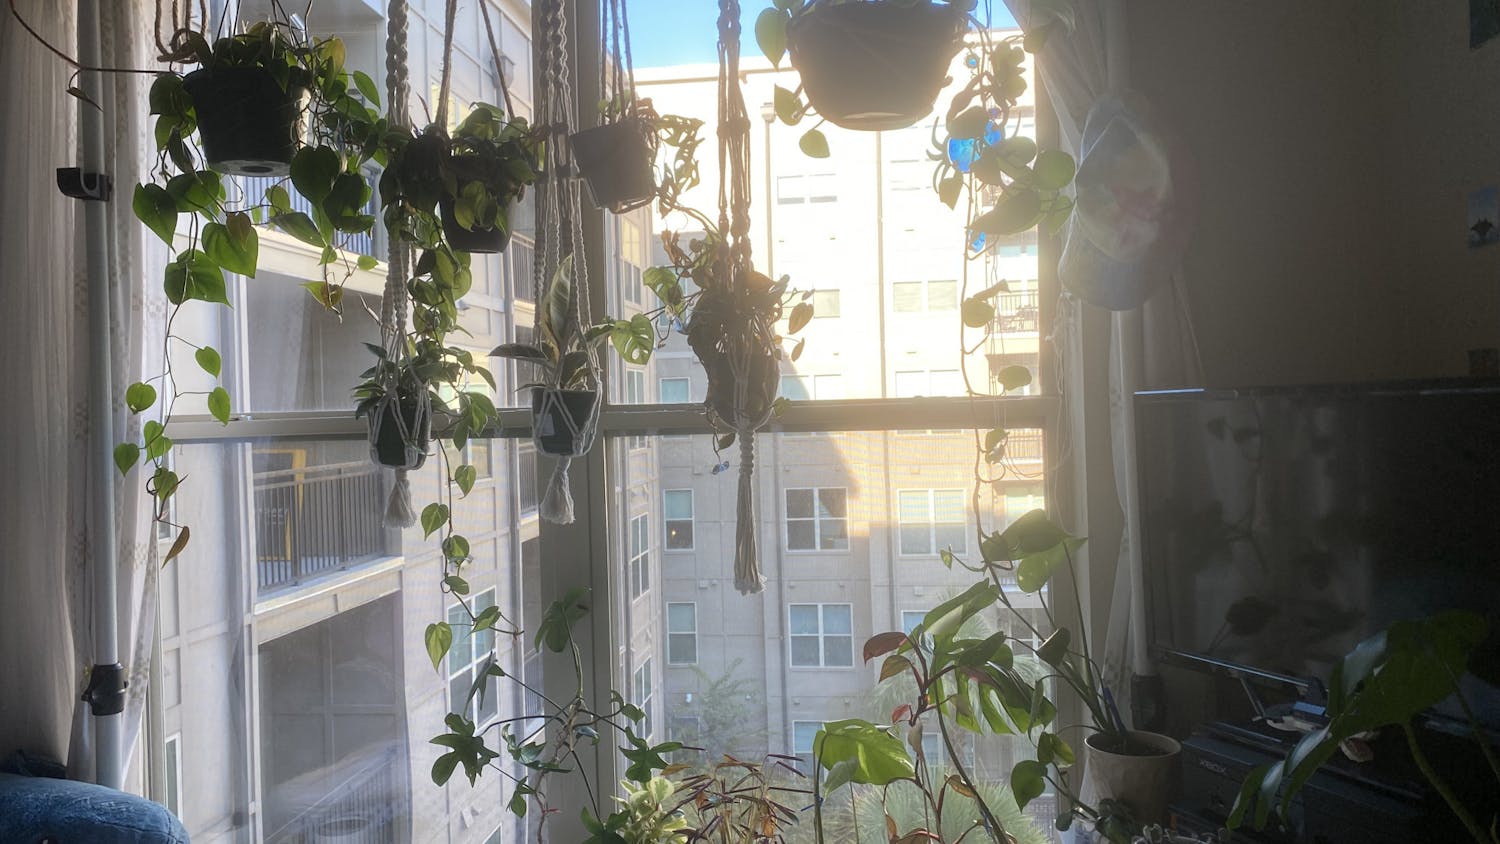 Potted plants hang from an apartment window on Sept. 21, 2022. These tiny viny hanging plants are known as pothos plants and are commonly grown in low light.